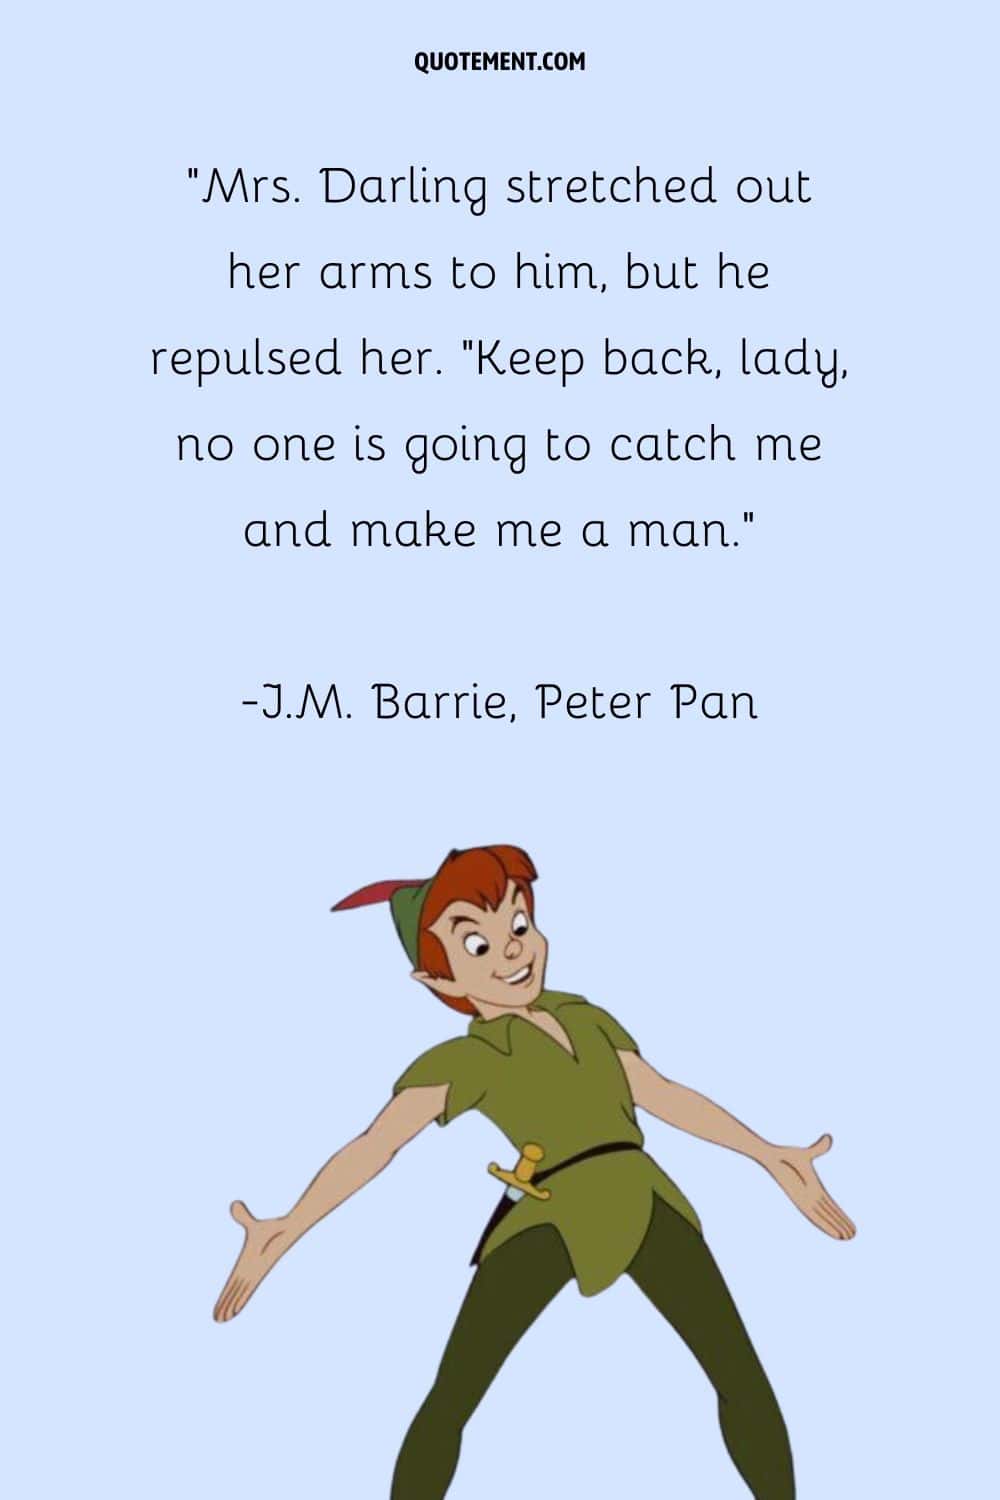 “Mrs. Darling stretched out her arms to him, but he repulsed her. “Keep back, lady, no one is going to catch me and make me a man.” ― J.M. Barrie, Peter Pan